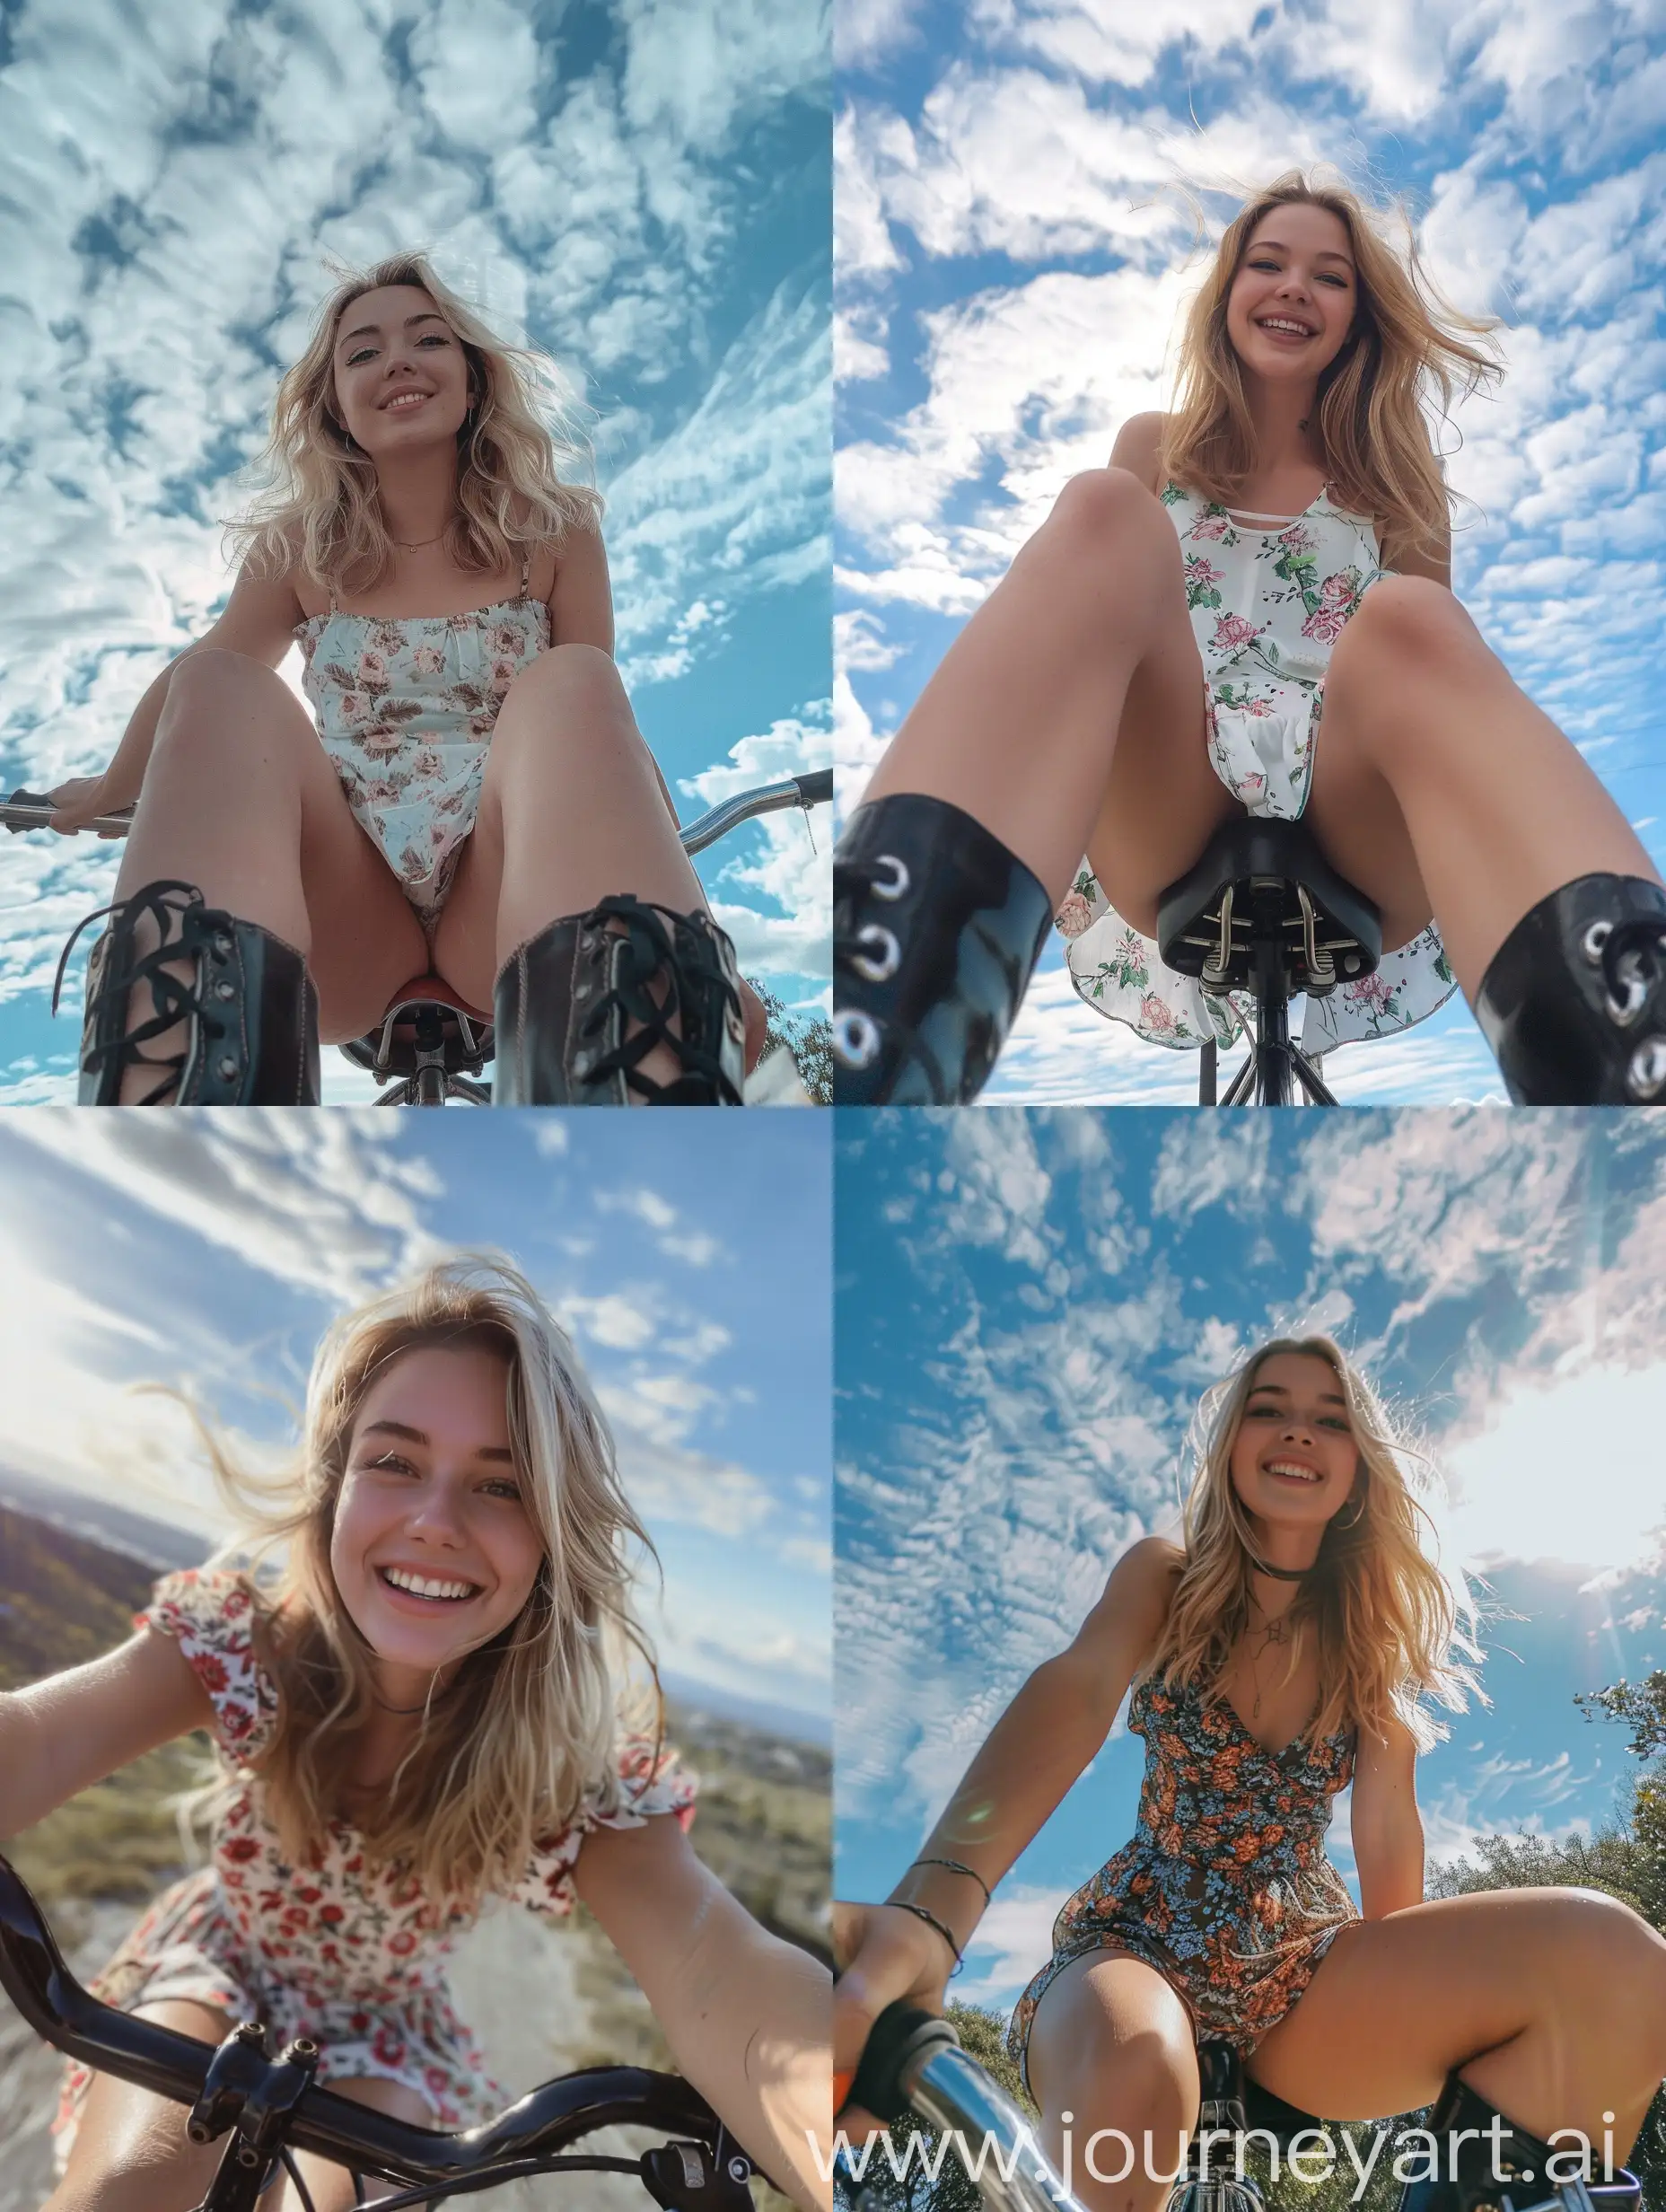 Young-Woman-in-Party-Dress-Riding-Bicycle-and-Taking-Selfie